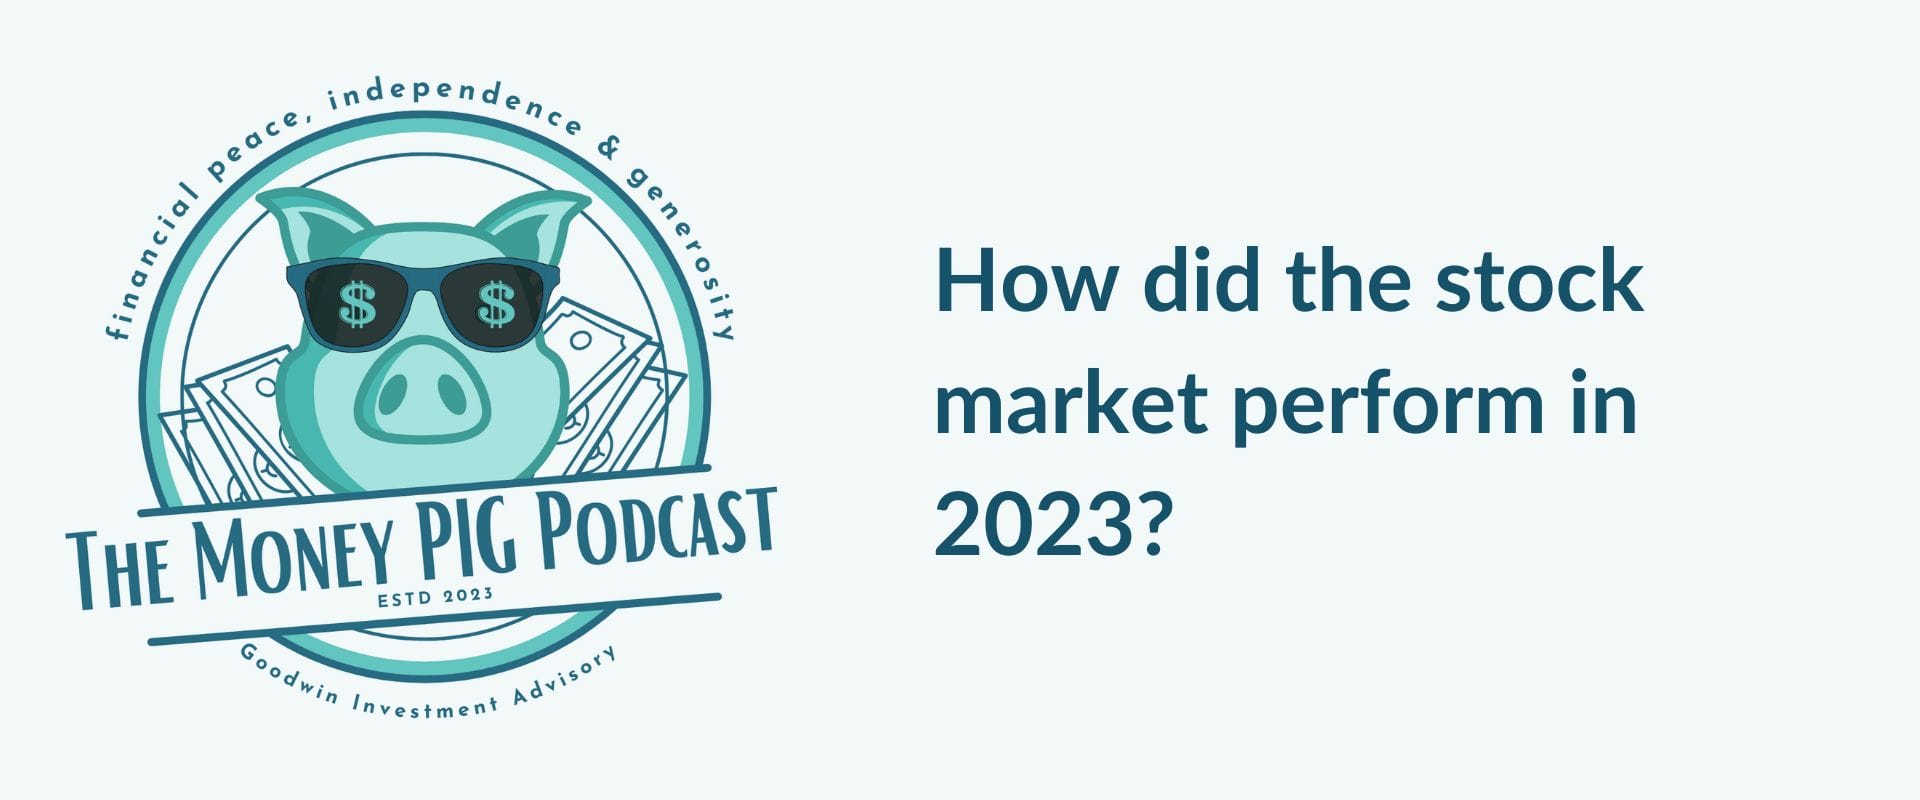 How did the stock market perform in 2023